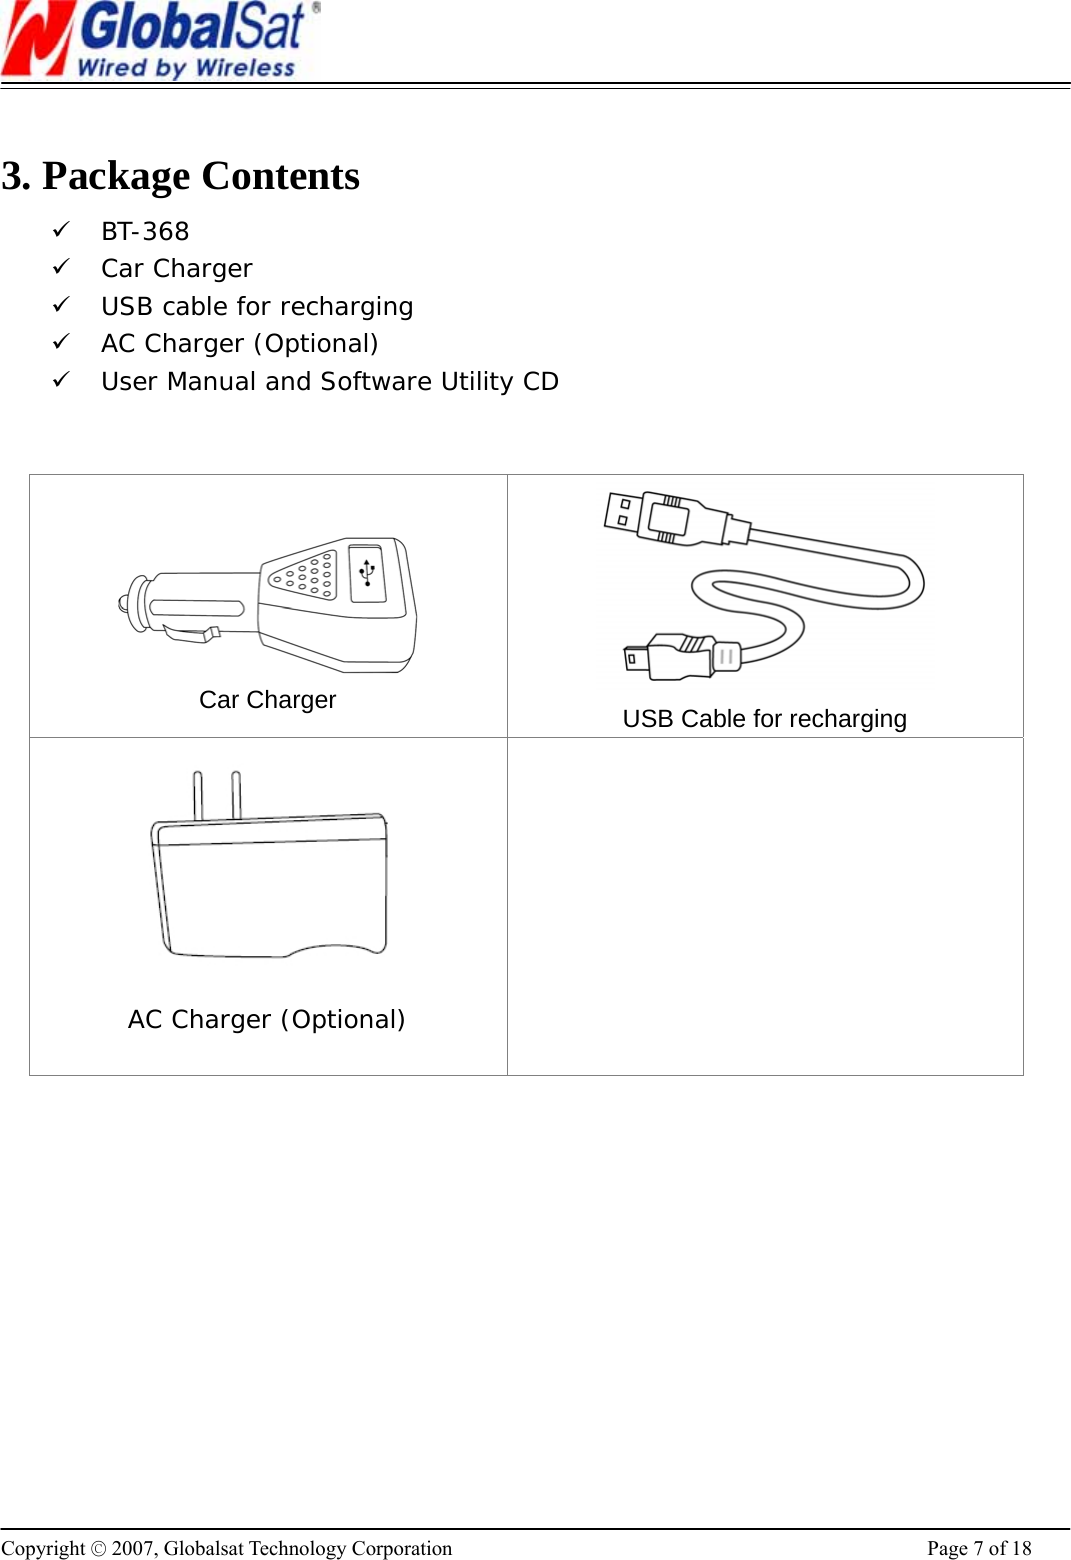                                                                      Copyright © 2007, Globalsat Technology Corporation  Page 7 of 18  3. Package Contents 9 BT-368  9 Car Charger  9 USB cable for recharging 9 AC Charger (Optional)  9 User Manual and Software Utility CD      Car Charger   USB Cable for recharging  AC Charger (Optional)      